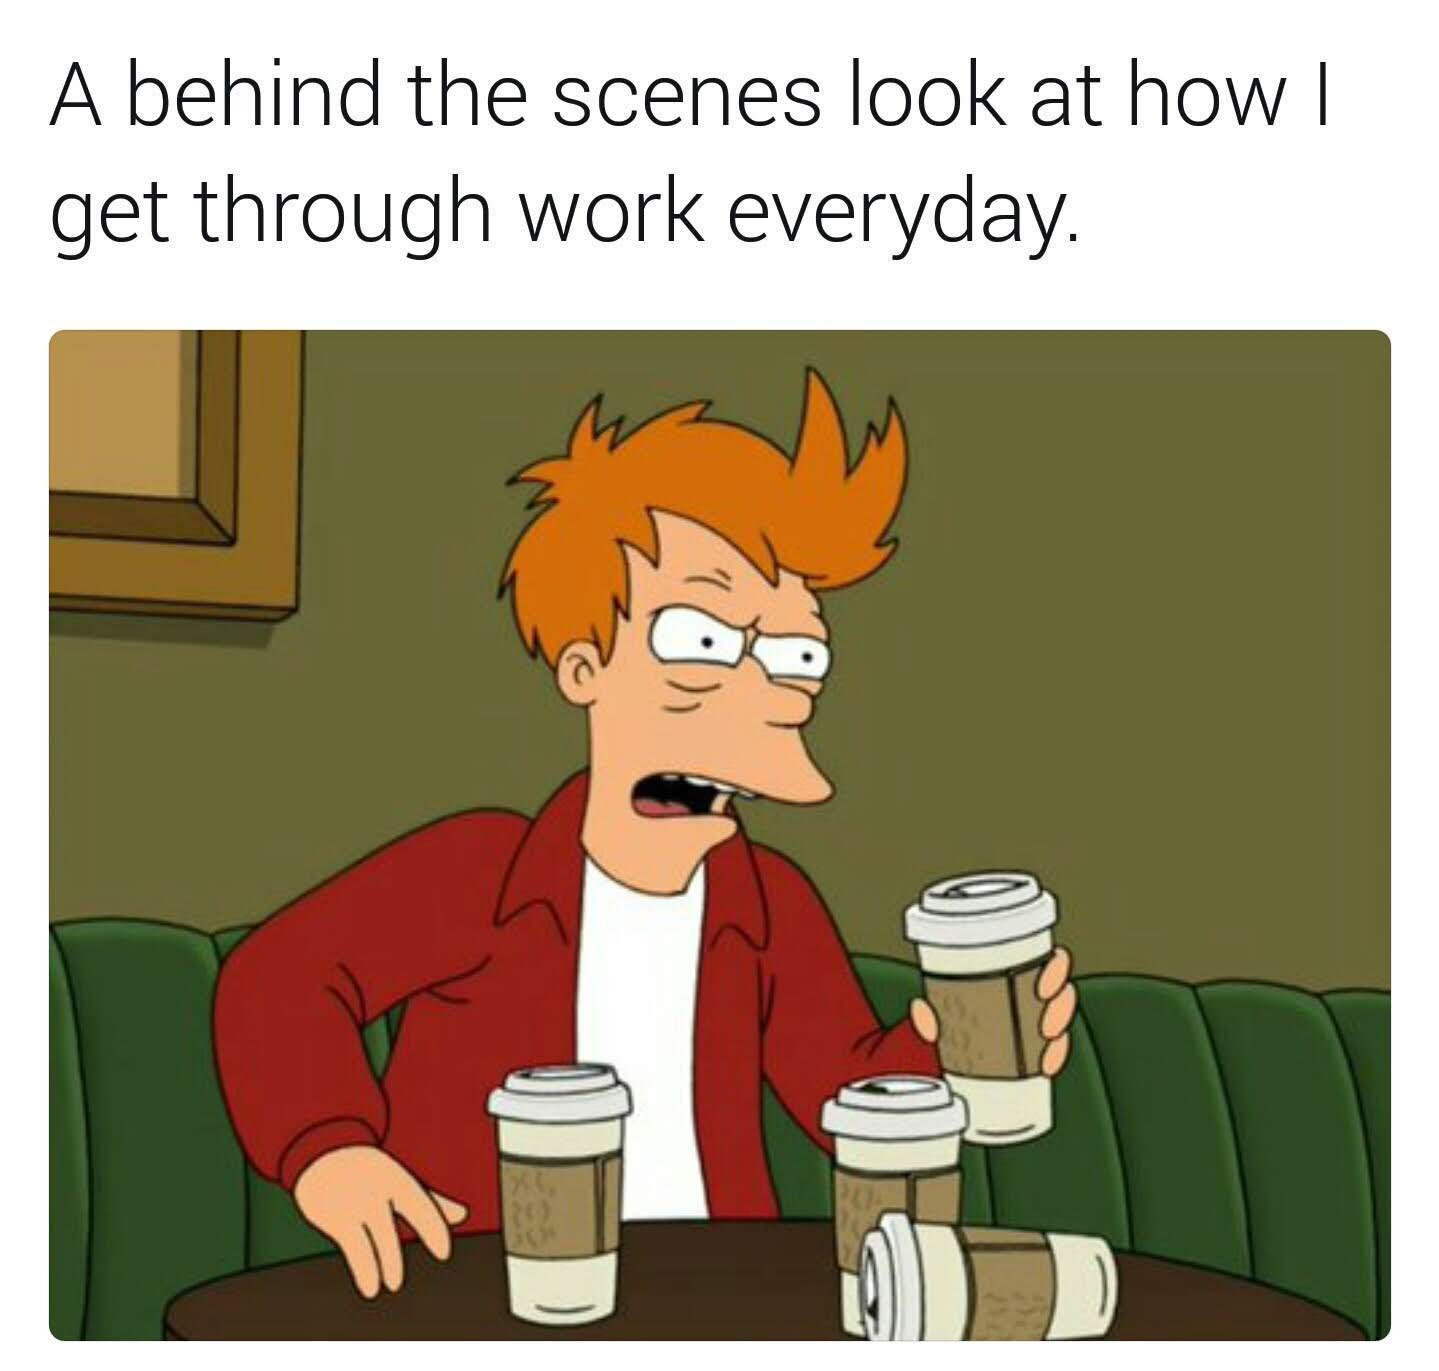 work everyday meme - A behind the scenes look at how I get through work everyday. 20